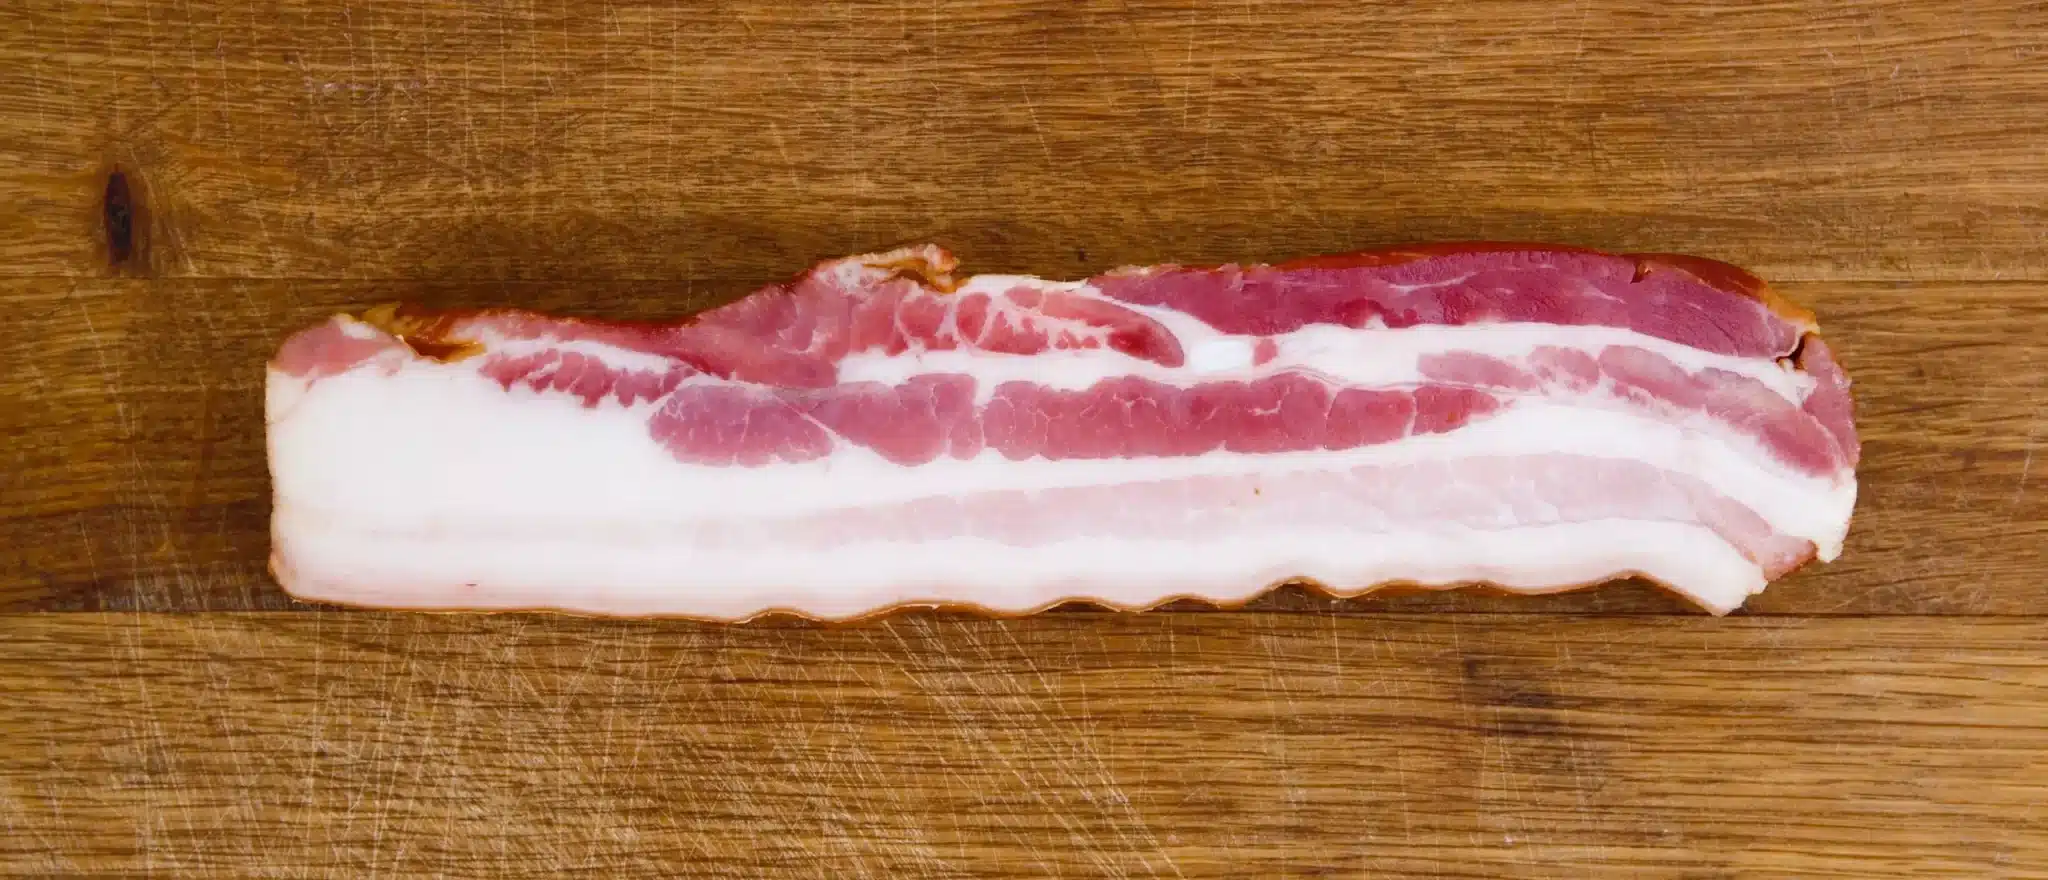 Is Nitrate-Free Bacon Actually Healthier? A Registered Dietitian Explains